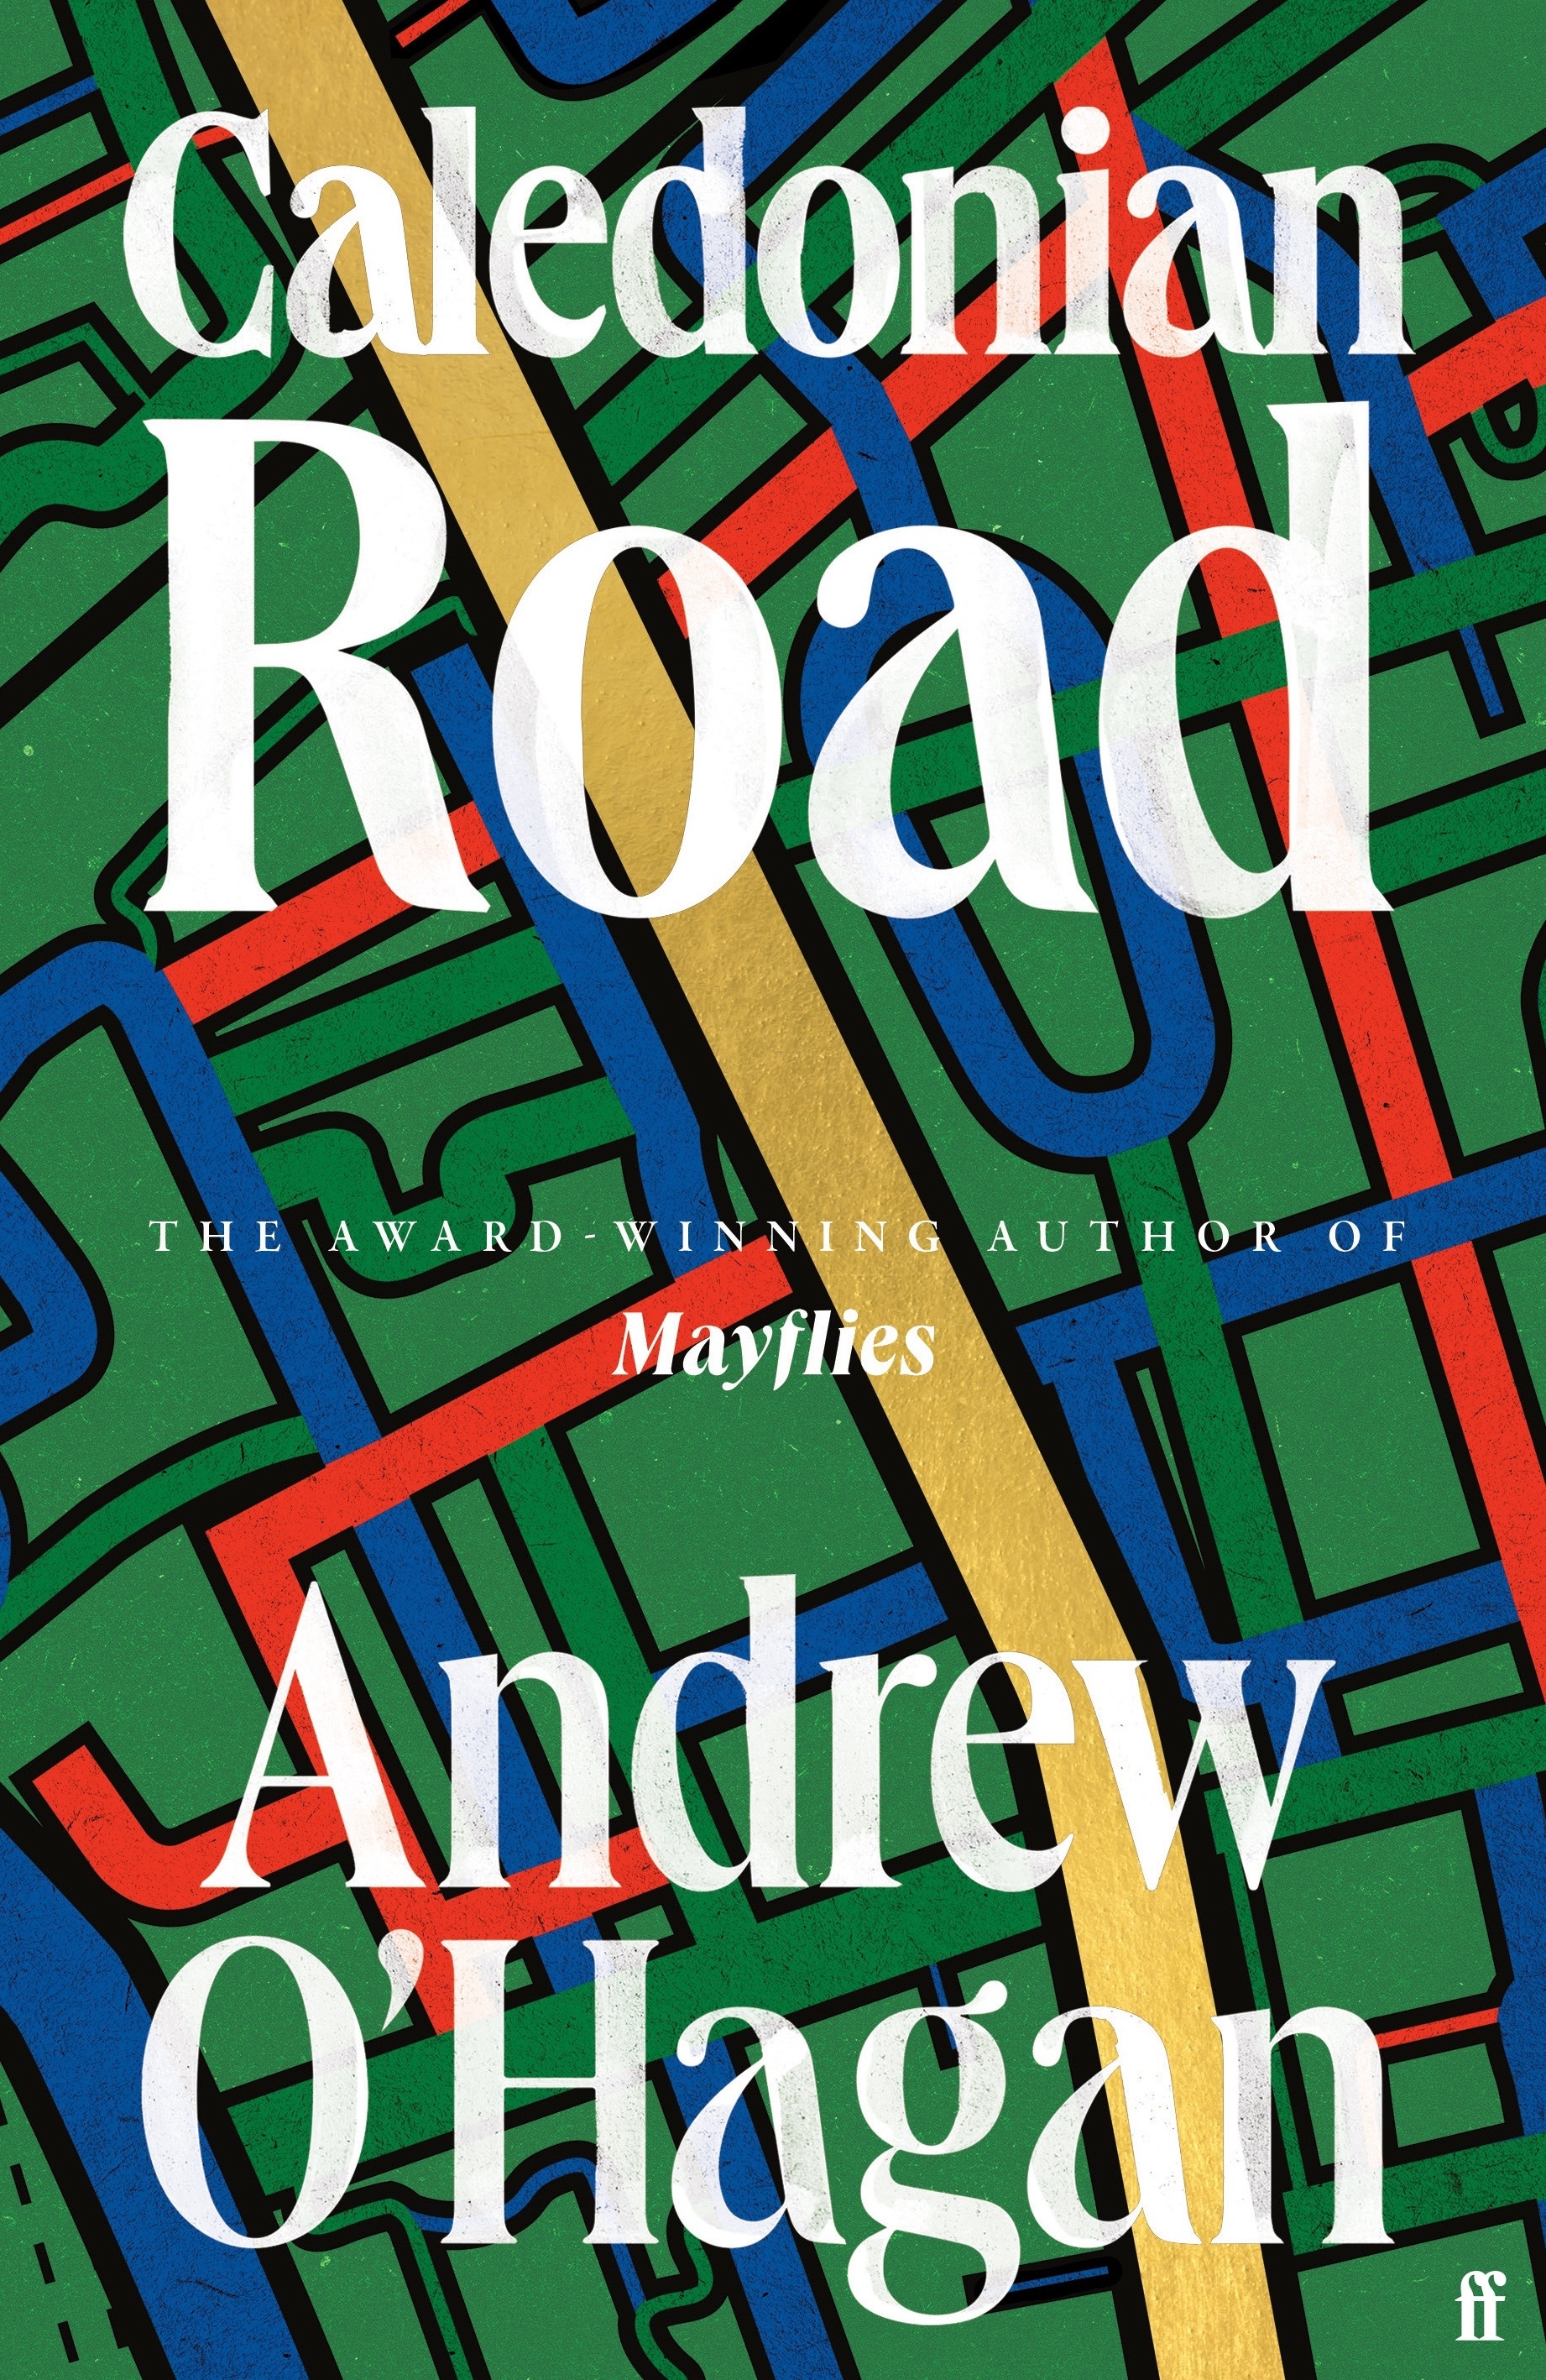 A book cover showing a stylised illustration of a map in green, blue and red